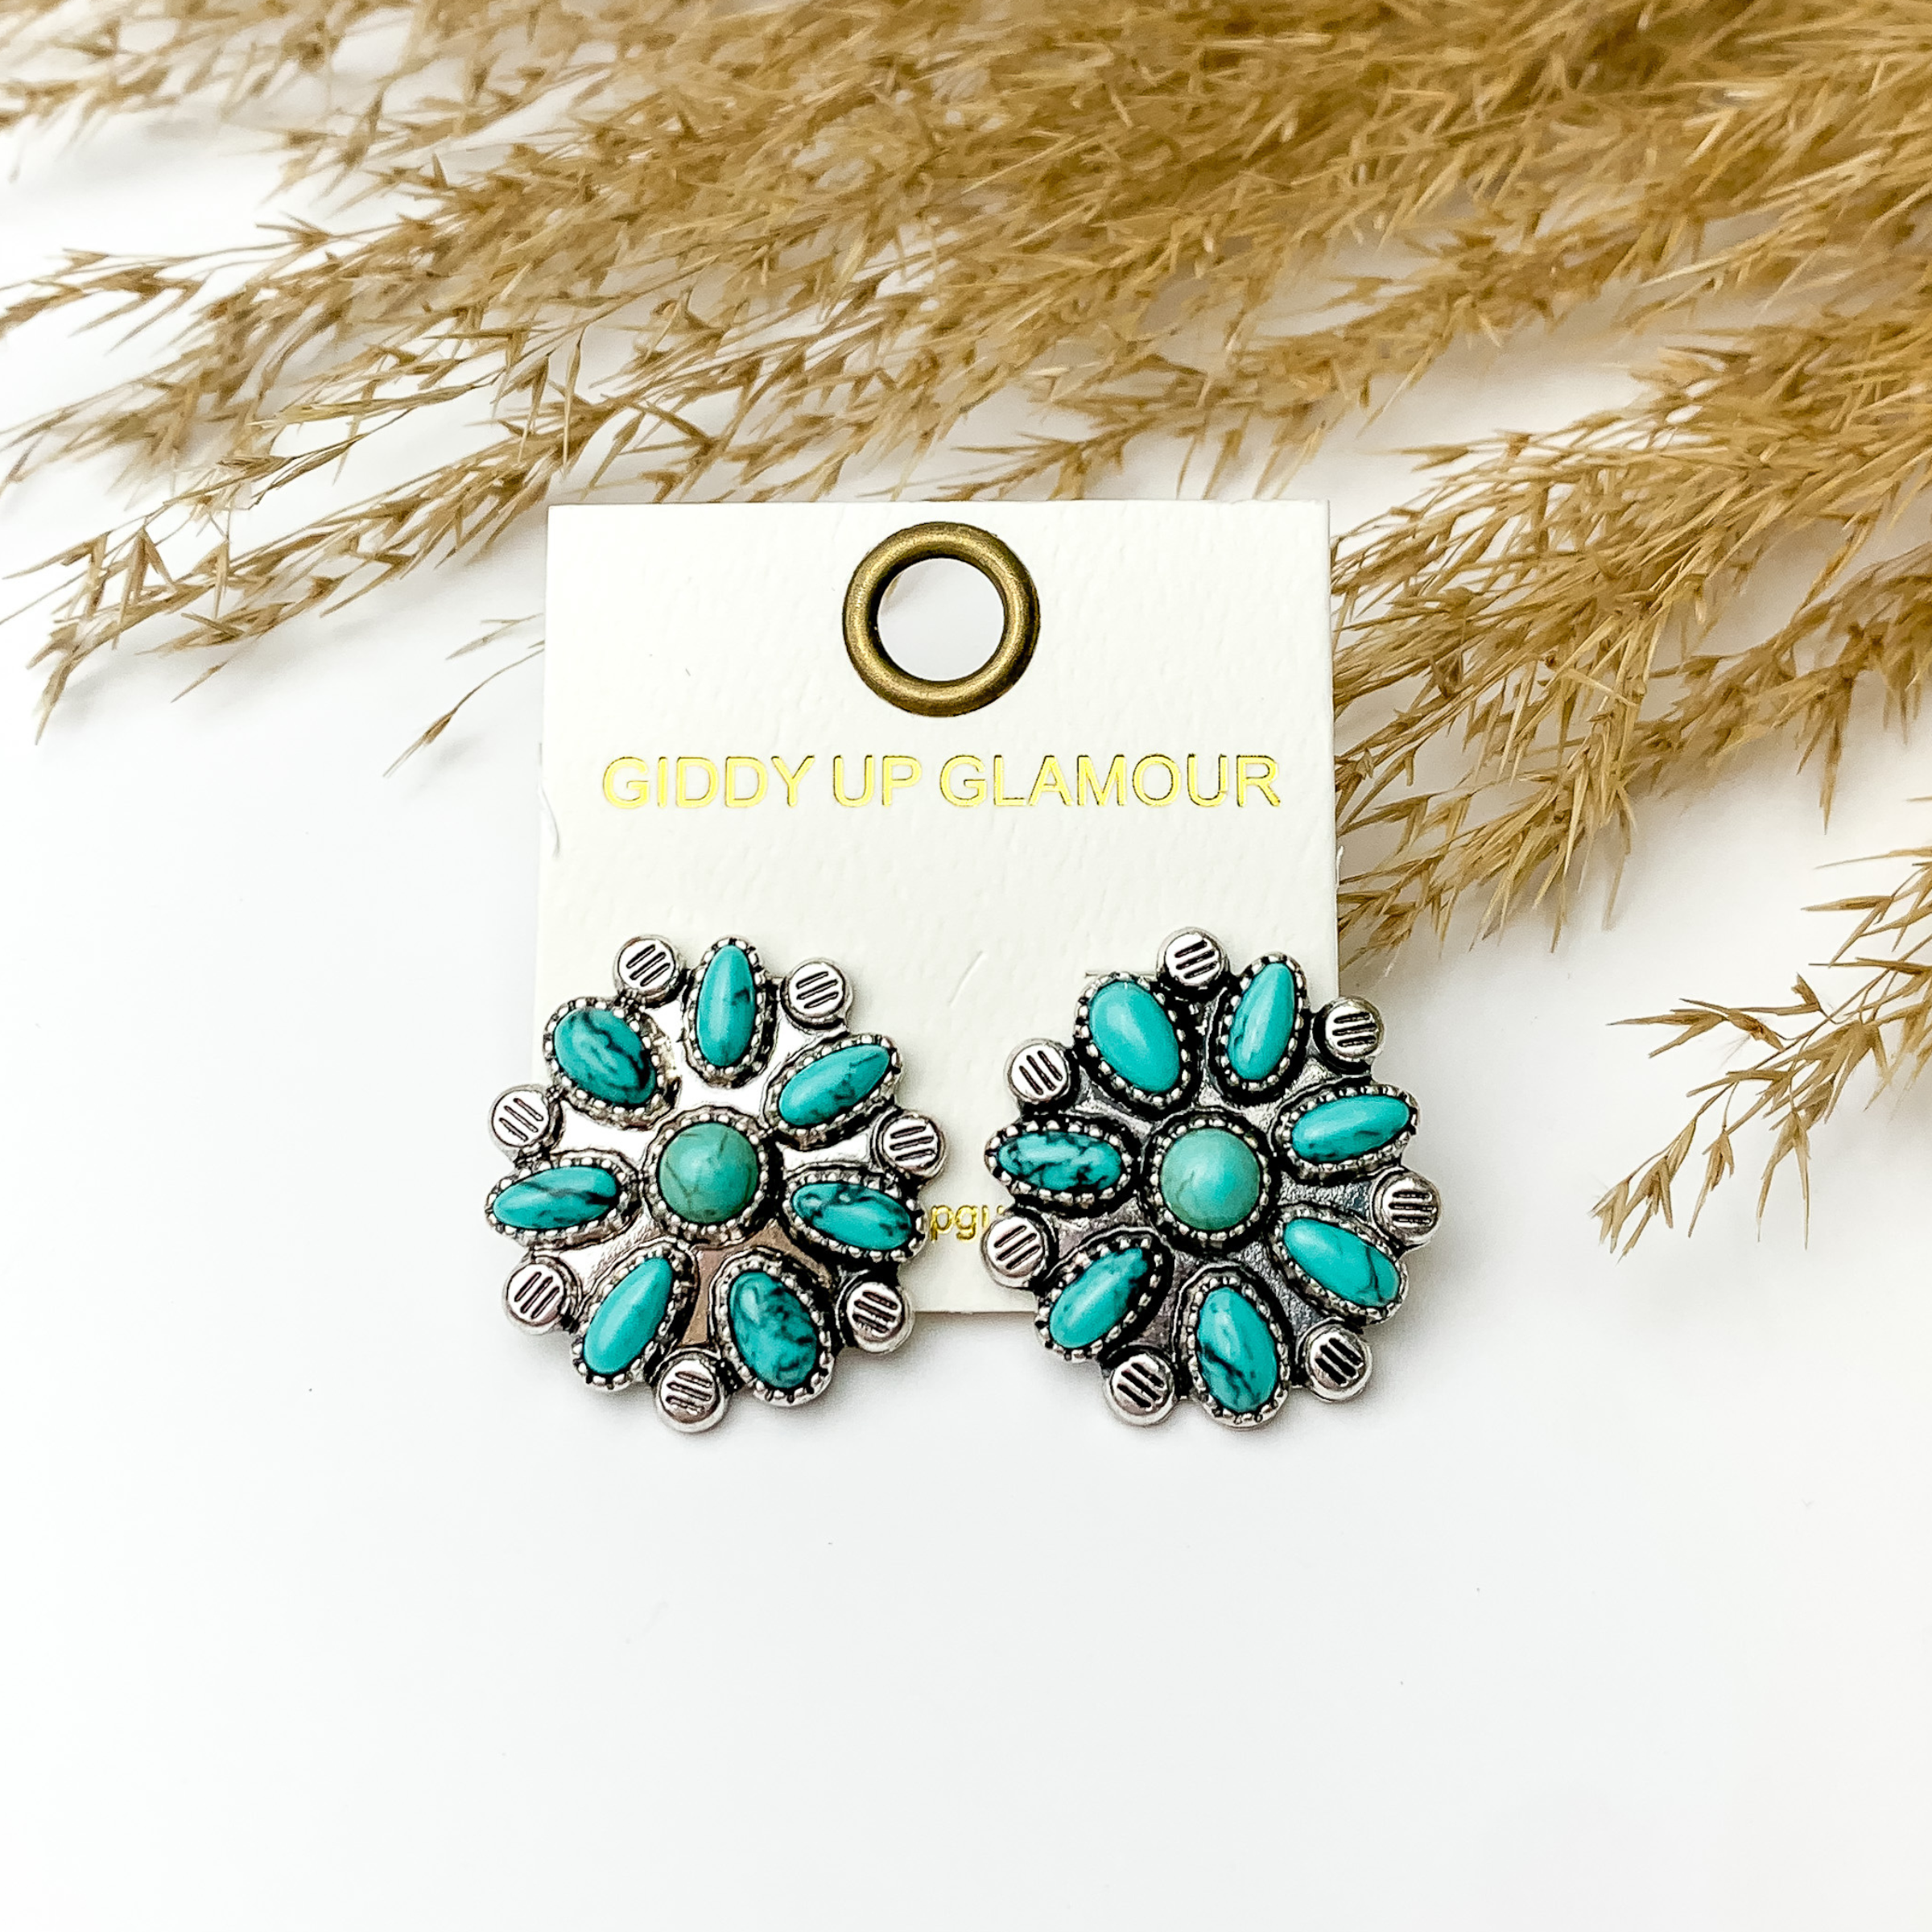 Three turquoise flower cluster stud earrings. These earrings are pictured on a white background in front of tan pompous grass. 